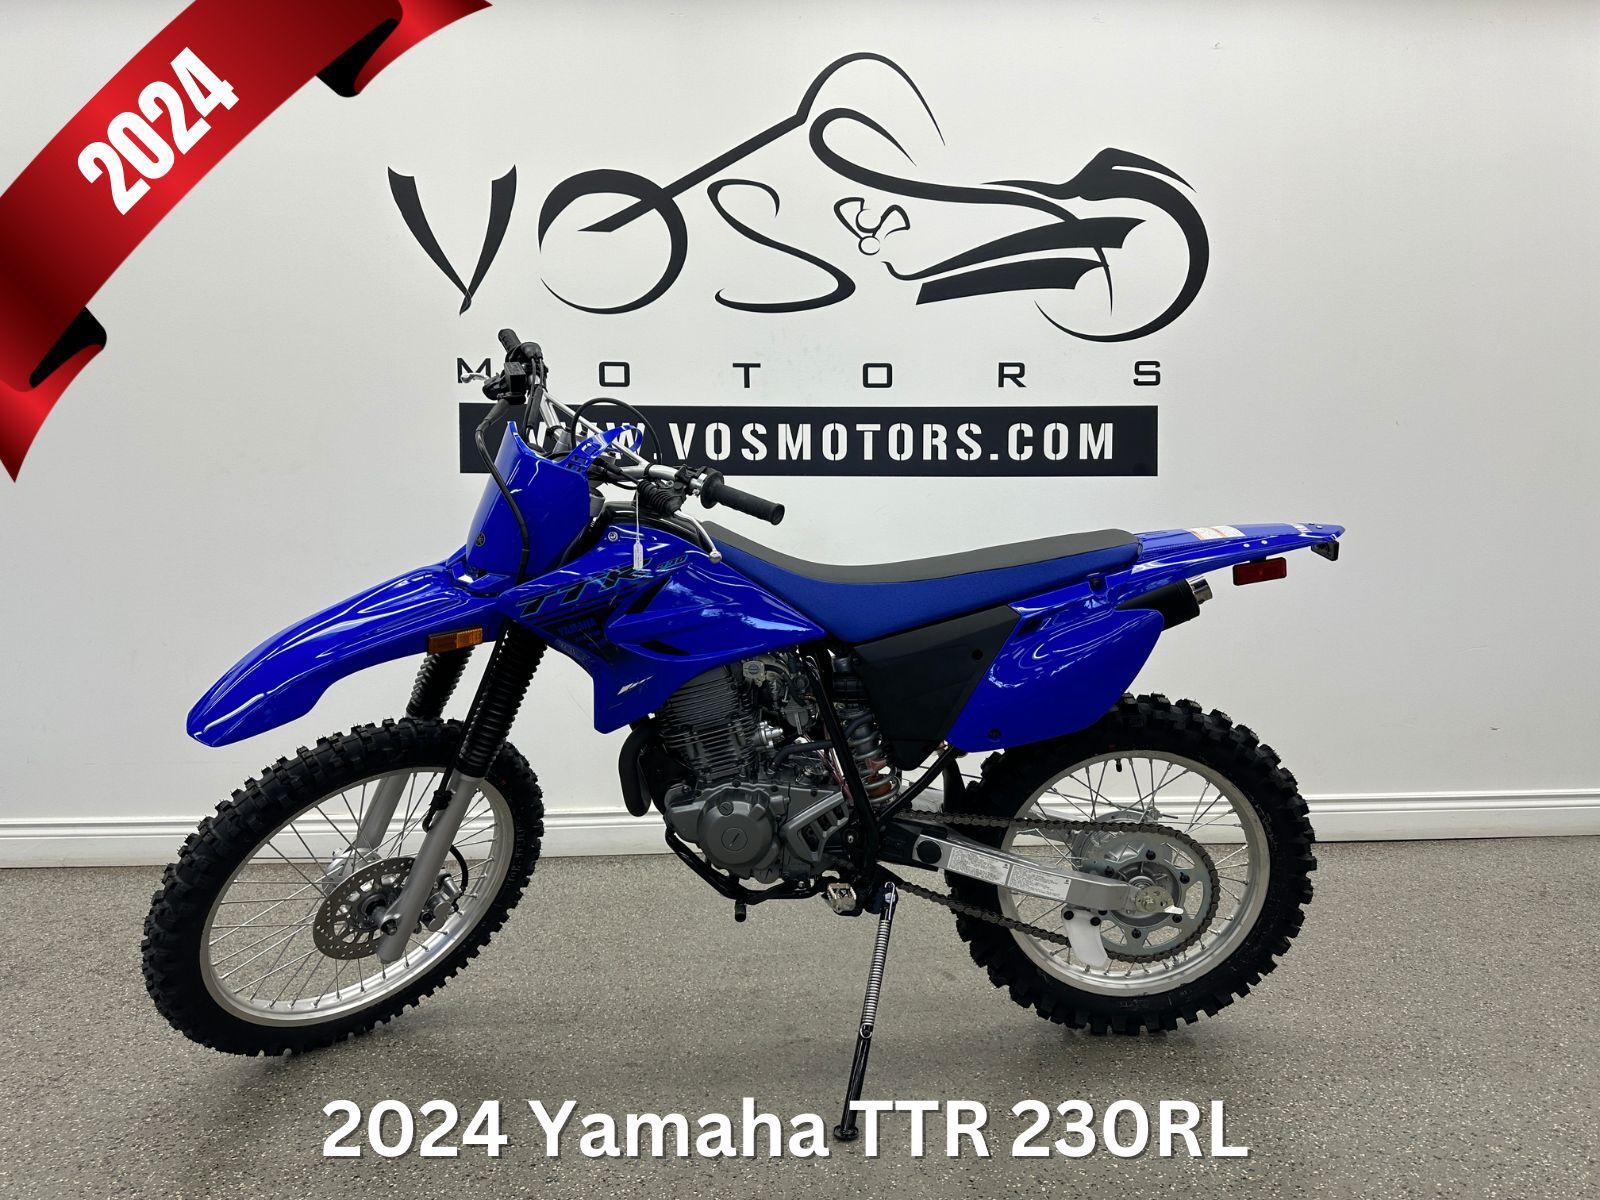 2024 Yamaha TTR230RL TT-R230 - V5904NP - -No Payments for 1 Year**